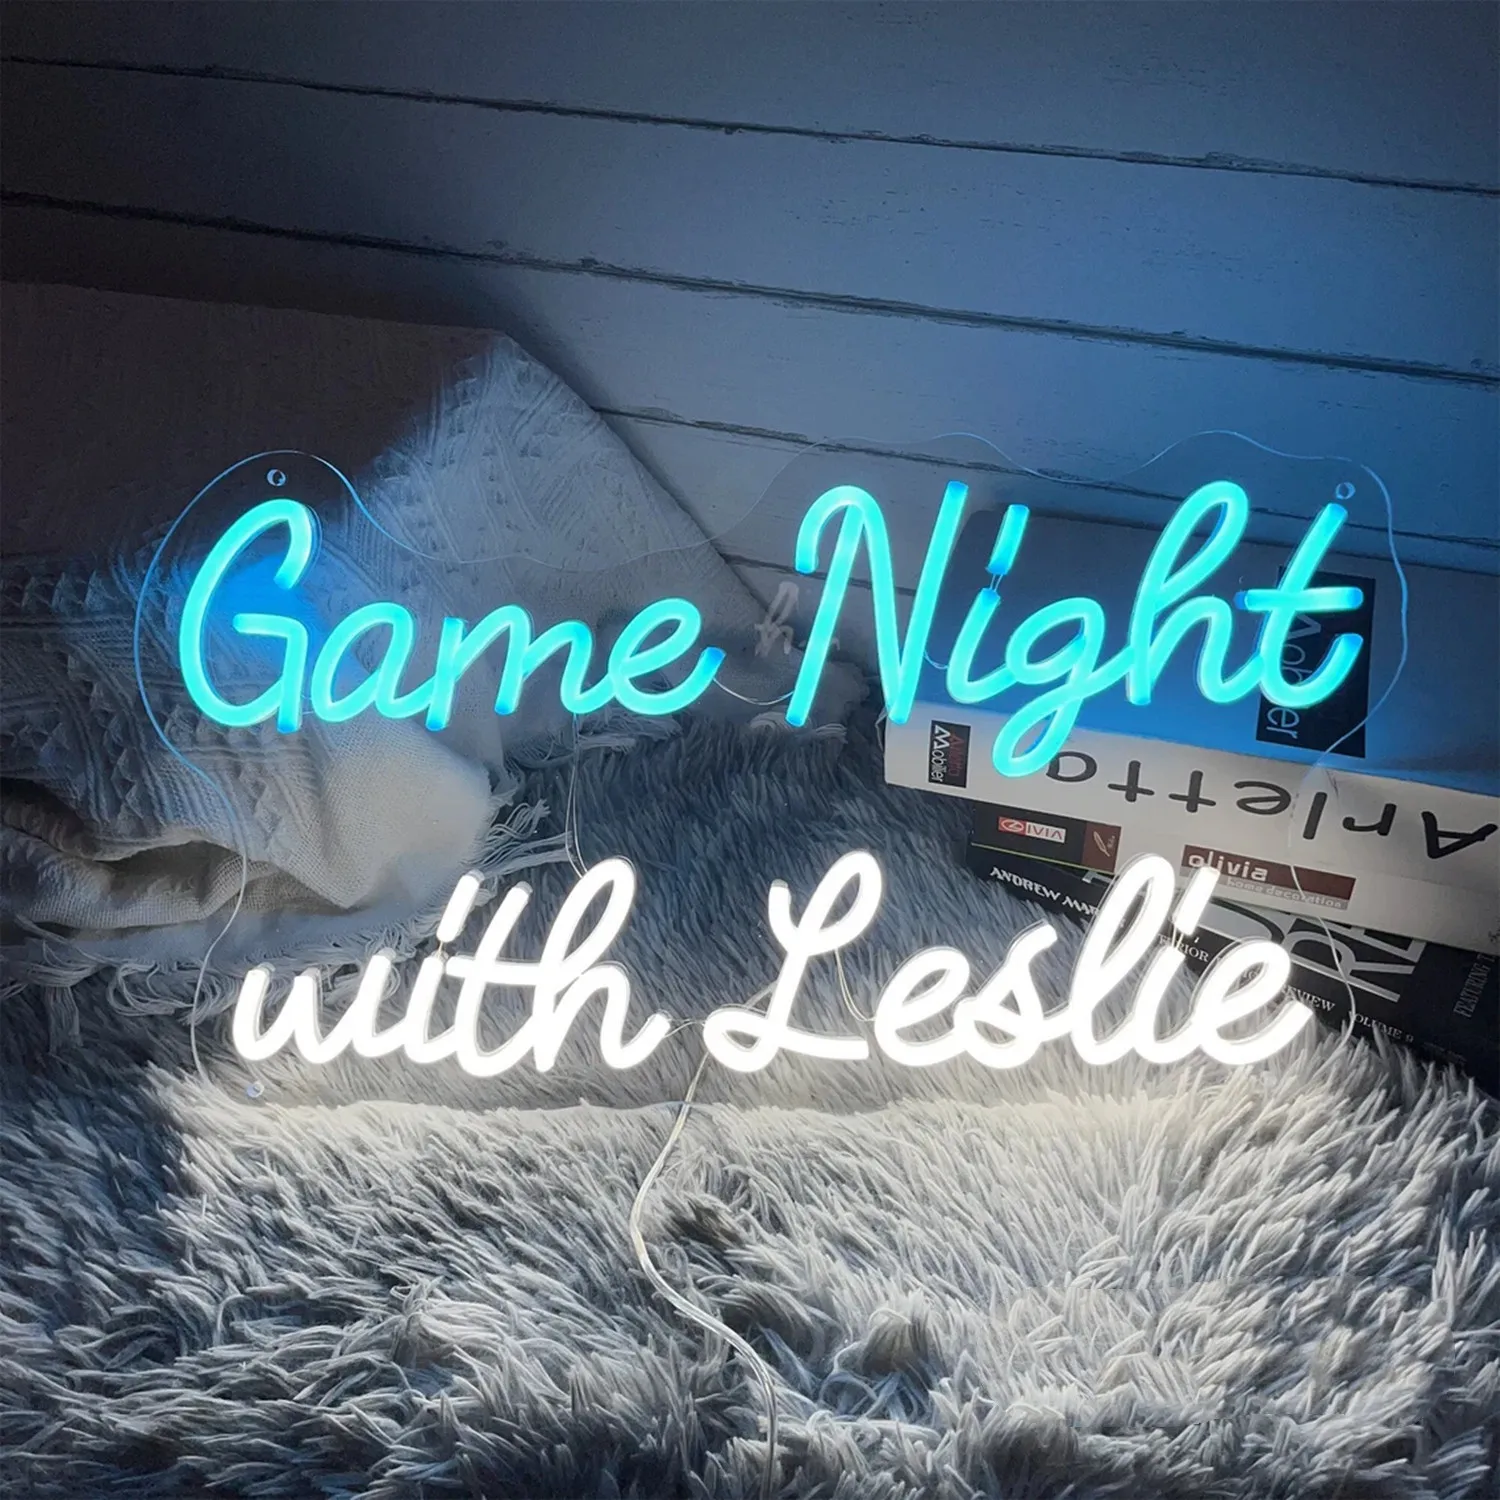 game-night-with-leslie-led-neon-signs-light-gift-for-teen-boy-game-room-decor-bedroom-wall-decoration-accessories-store-bar-wall